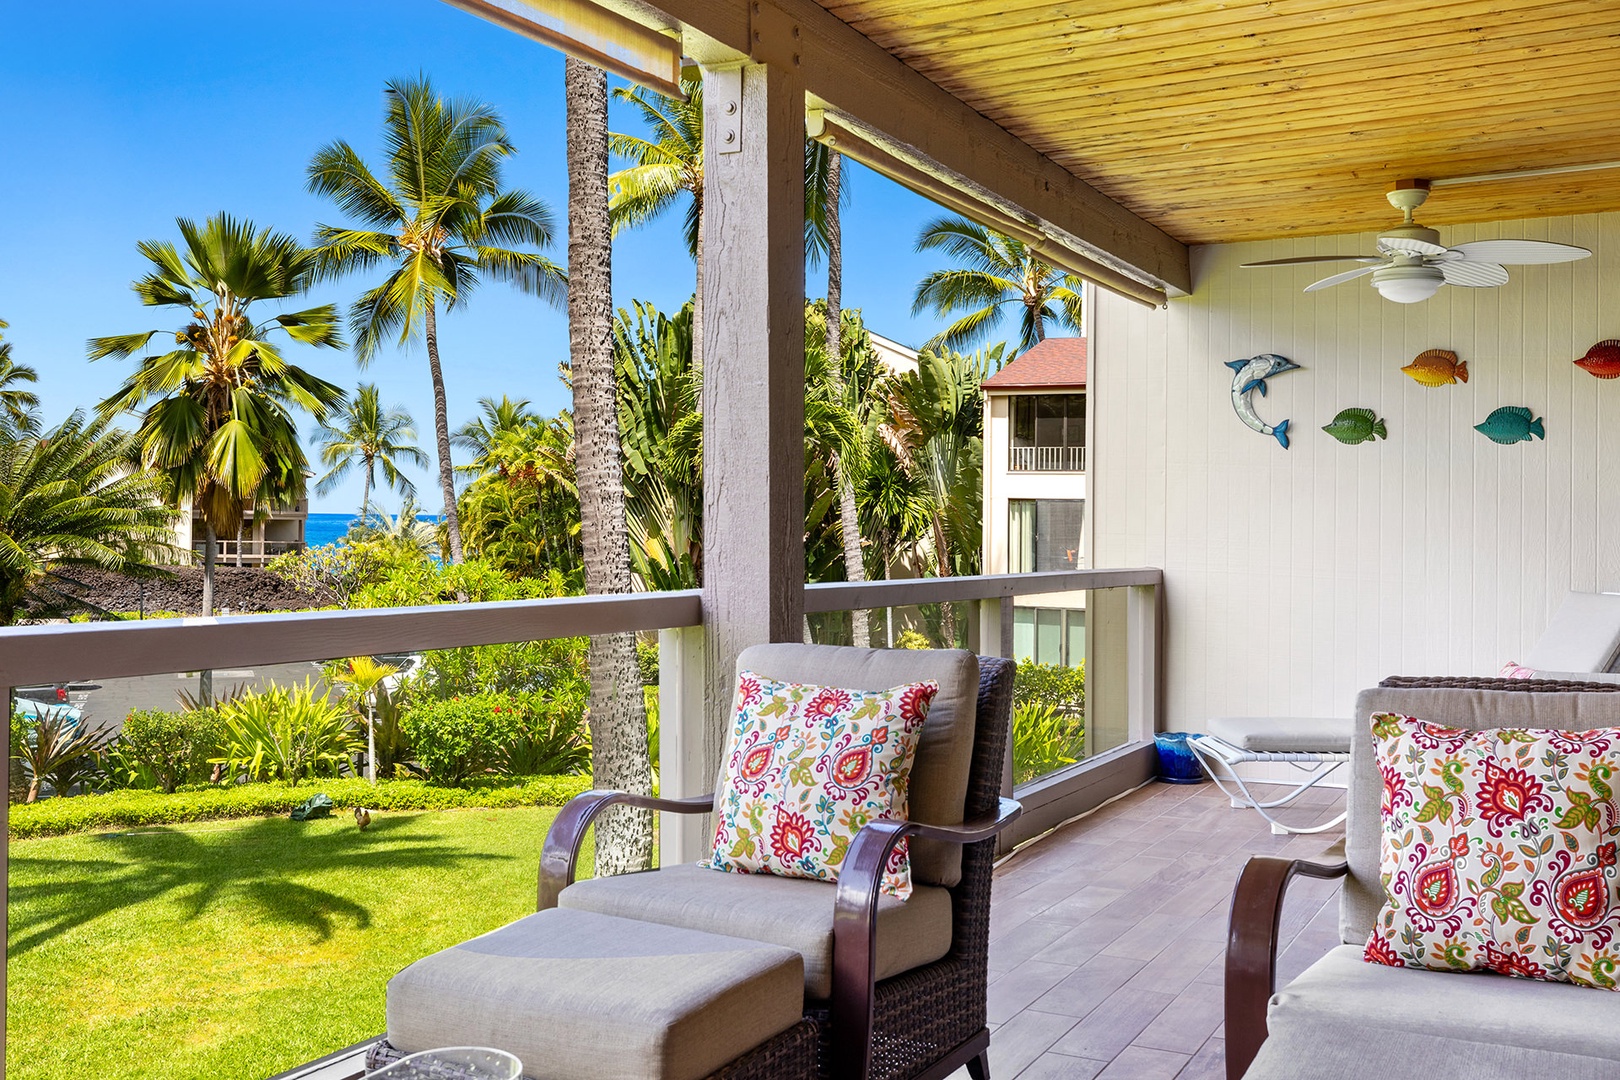 Lanai with amazing views and outdoor seating